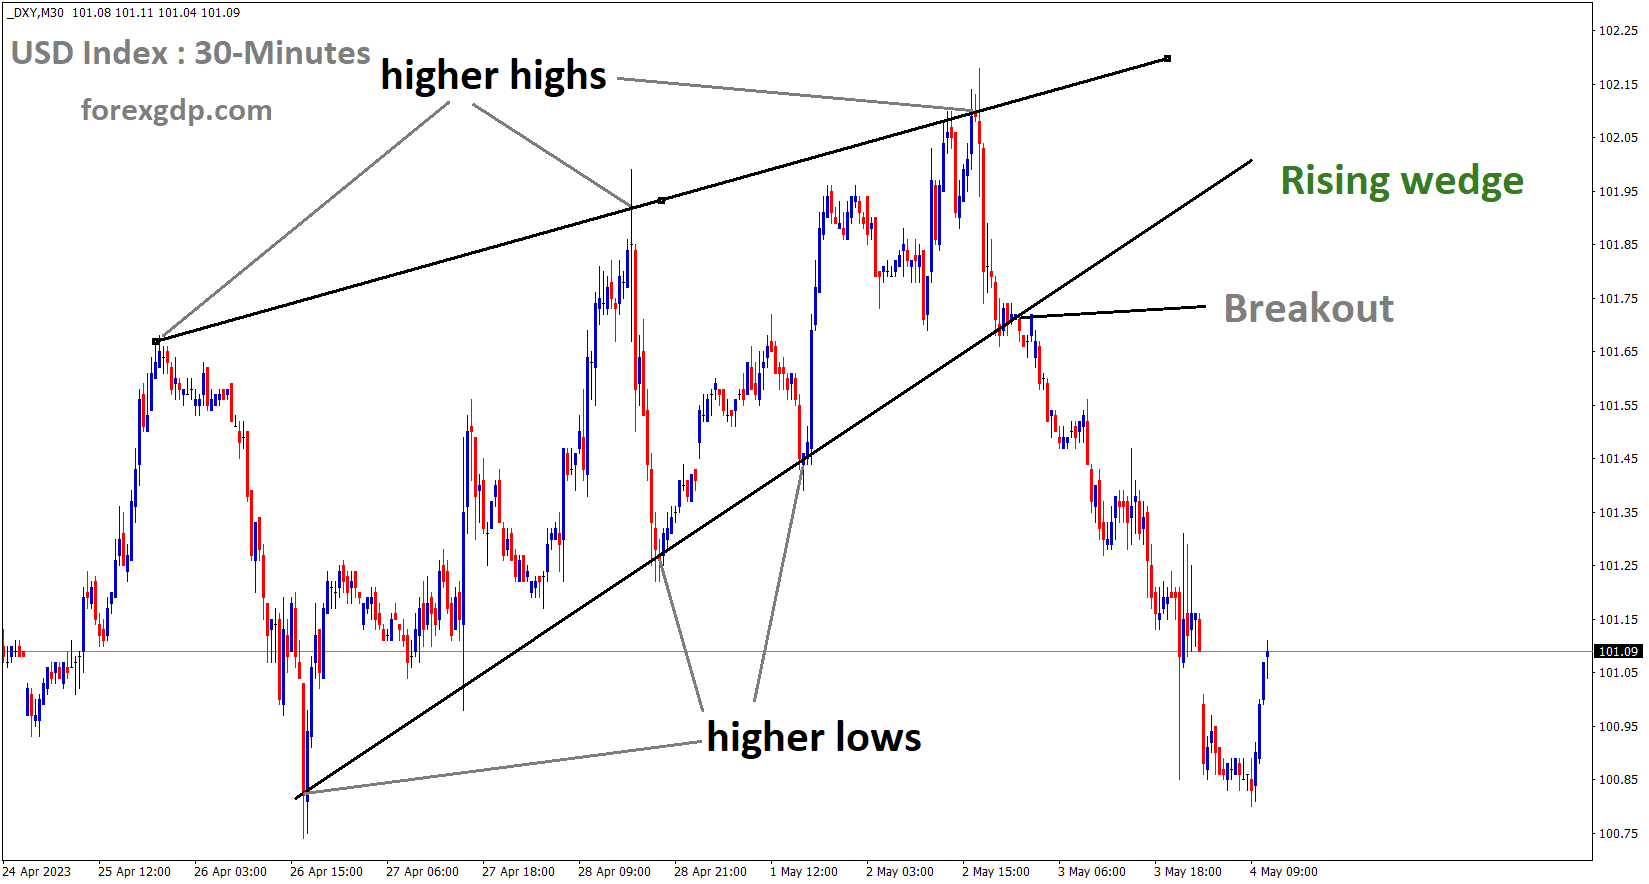 DXY Index has broken the rising wedge pattern in downside